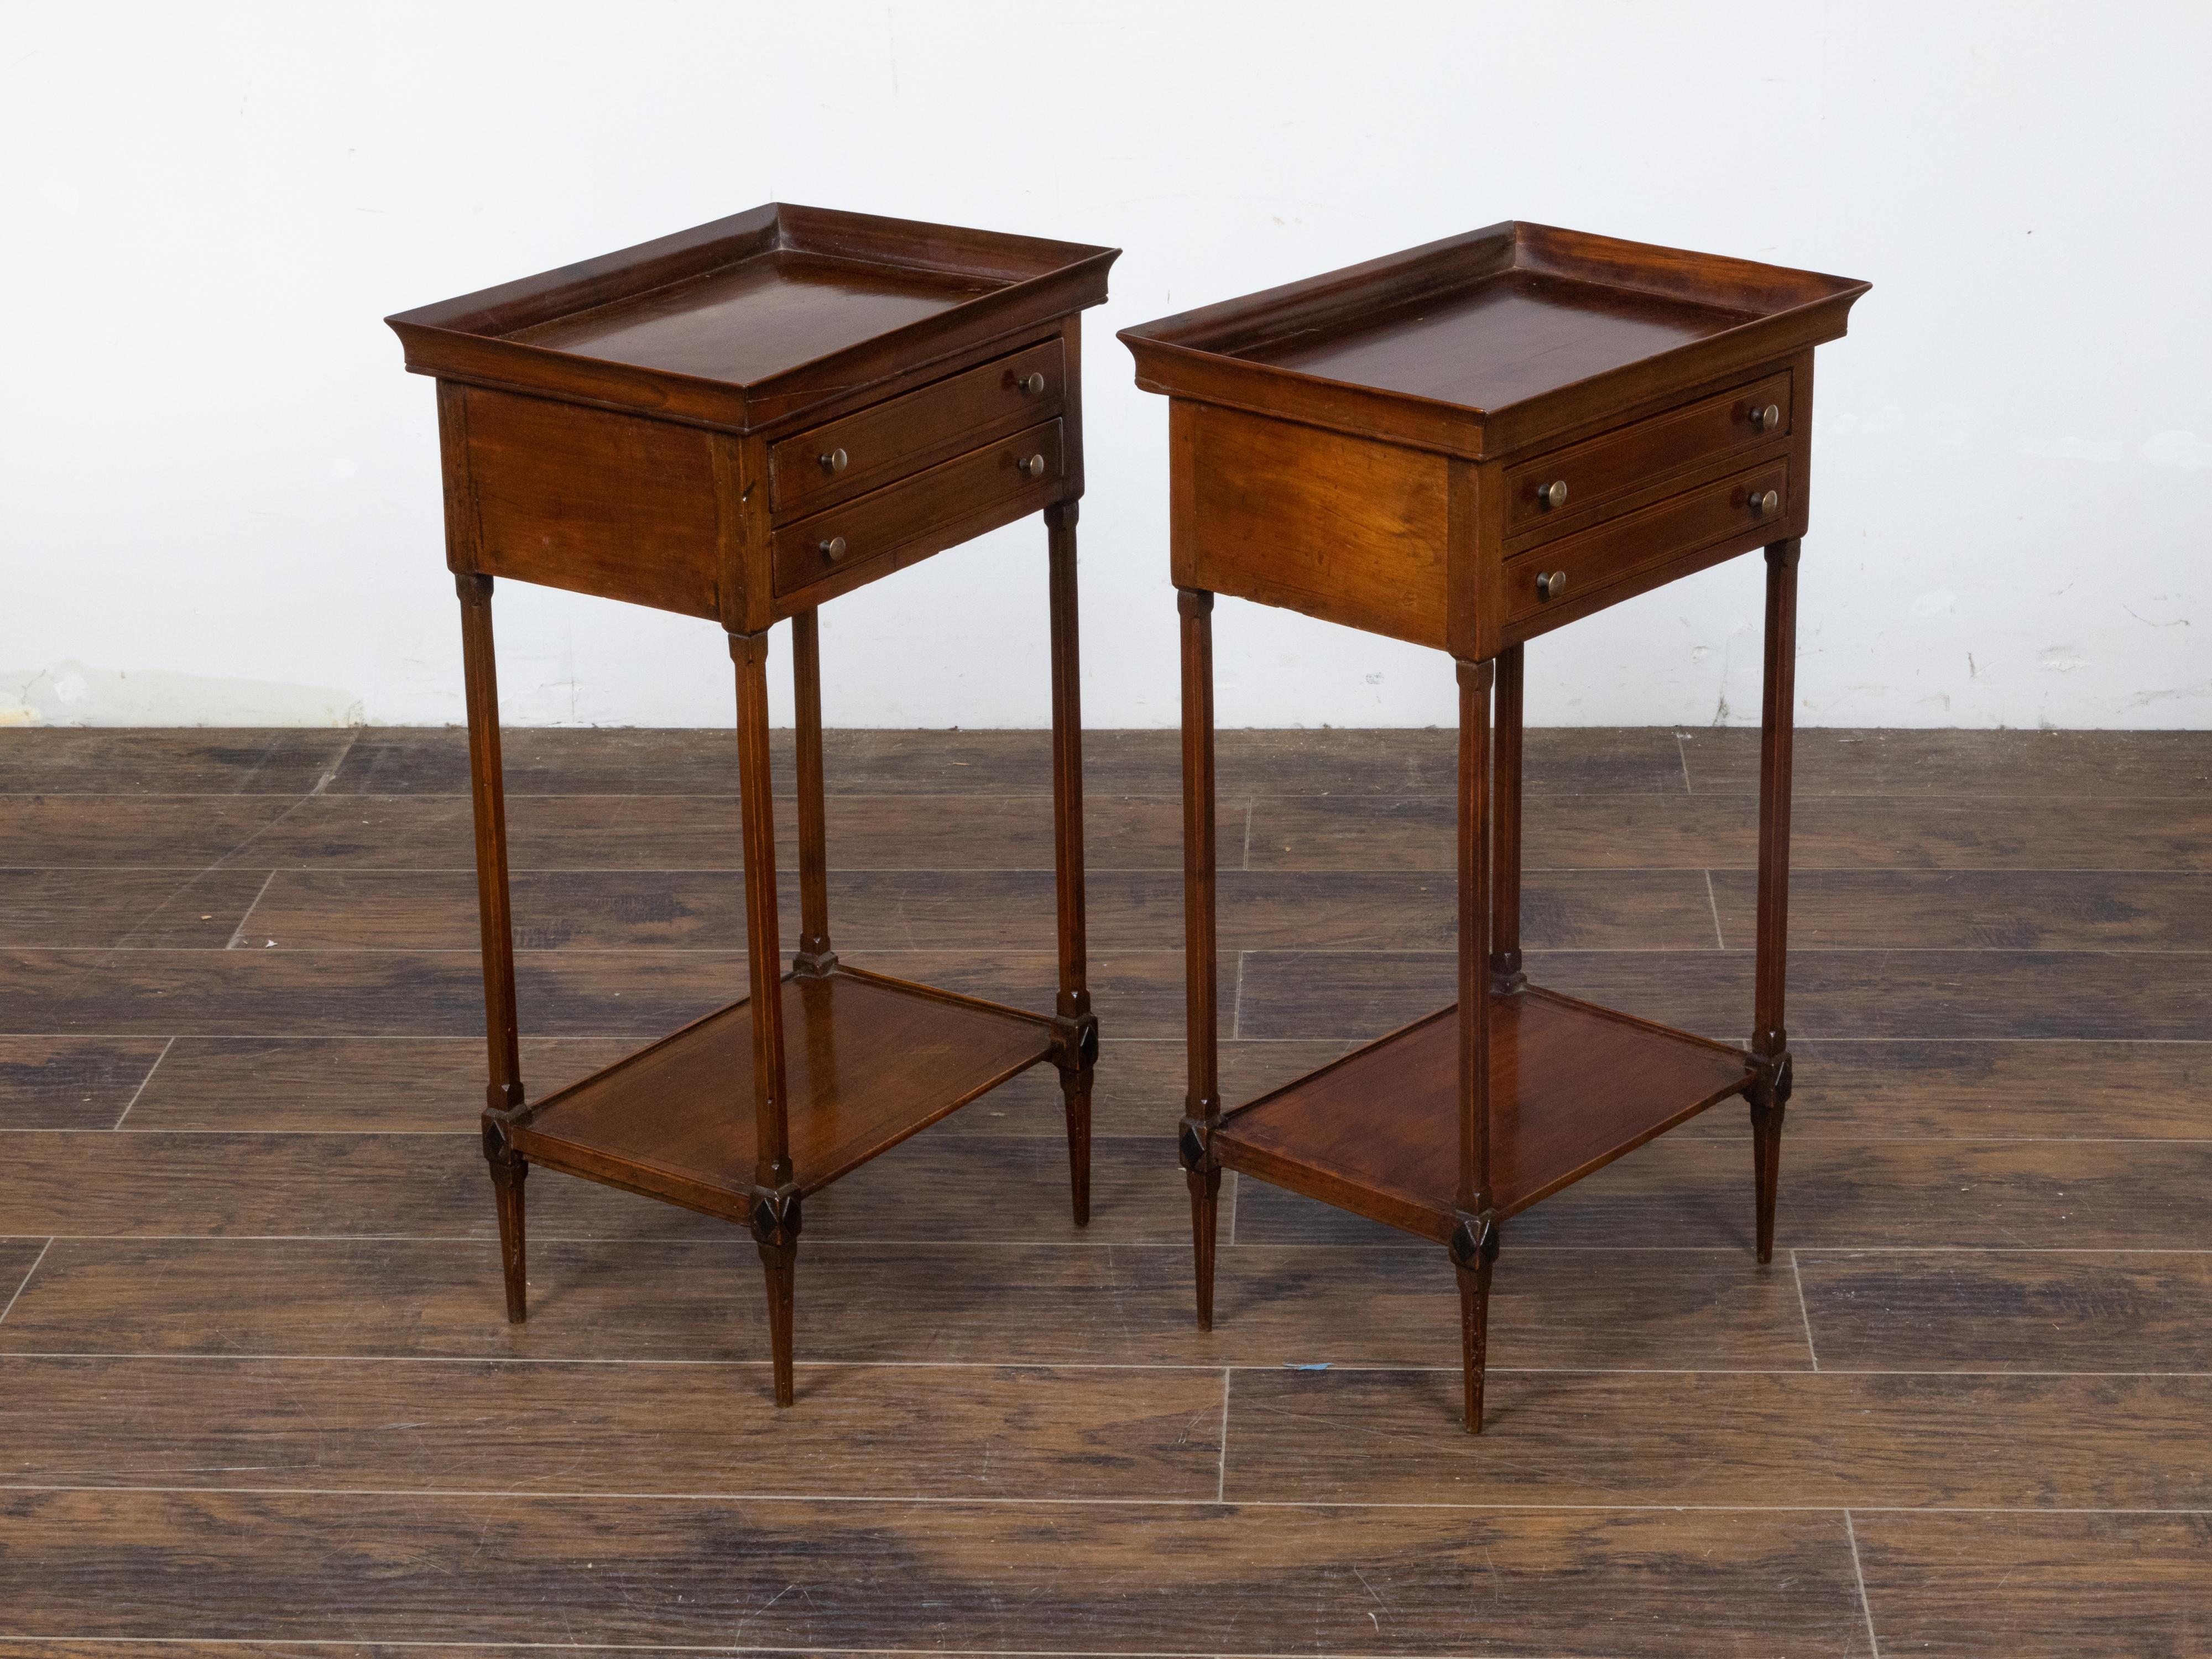 A pair of French mahogany bedside tables from the 19th century with tray tops, two drawers each, discreet banding, lower shelves and ebonized carved diamond motifs on the knees. This elegant pair of French mahogany bedside tables hails from the 19th